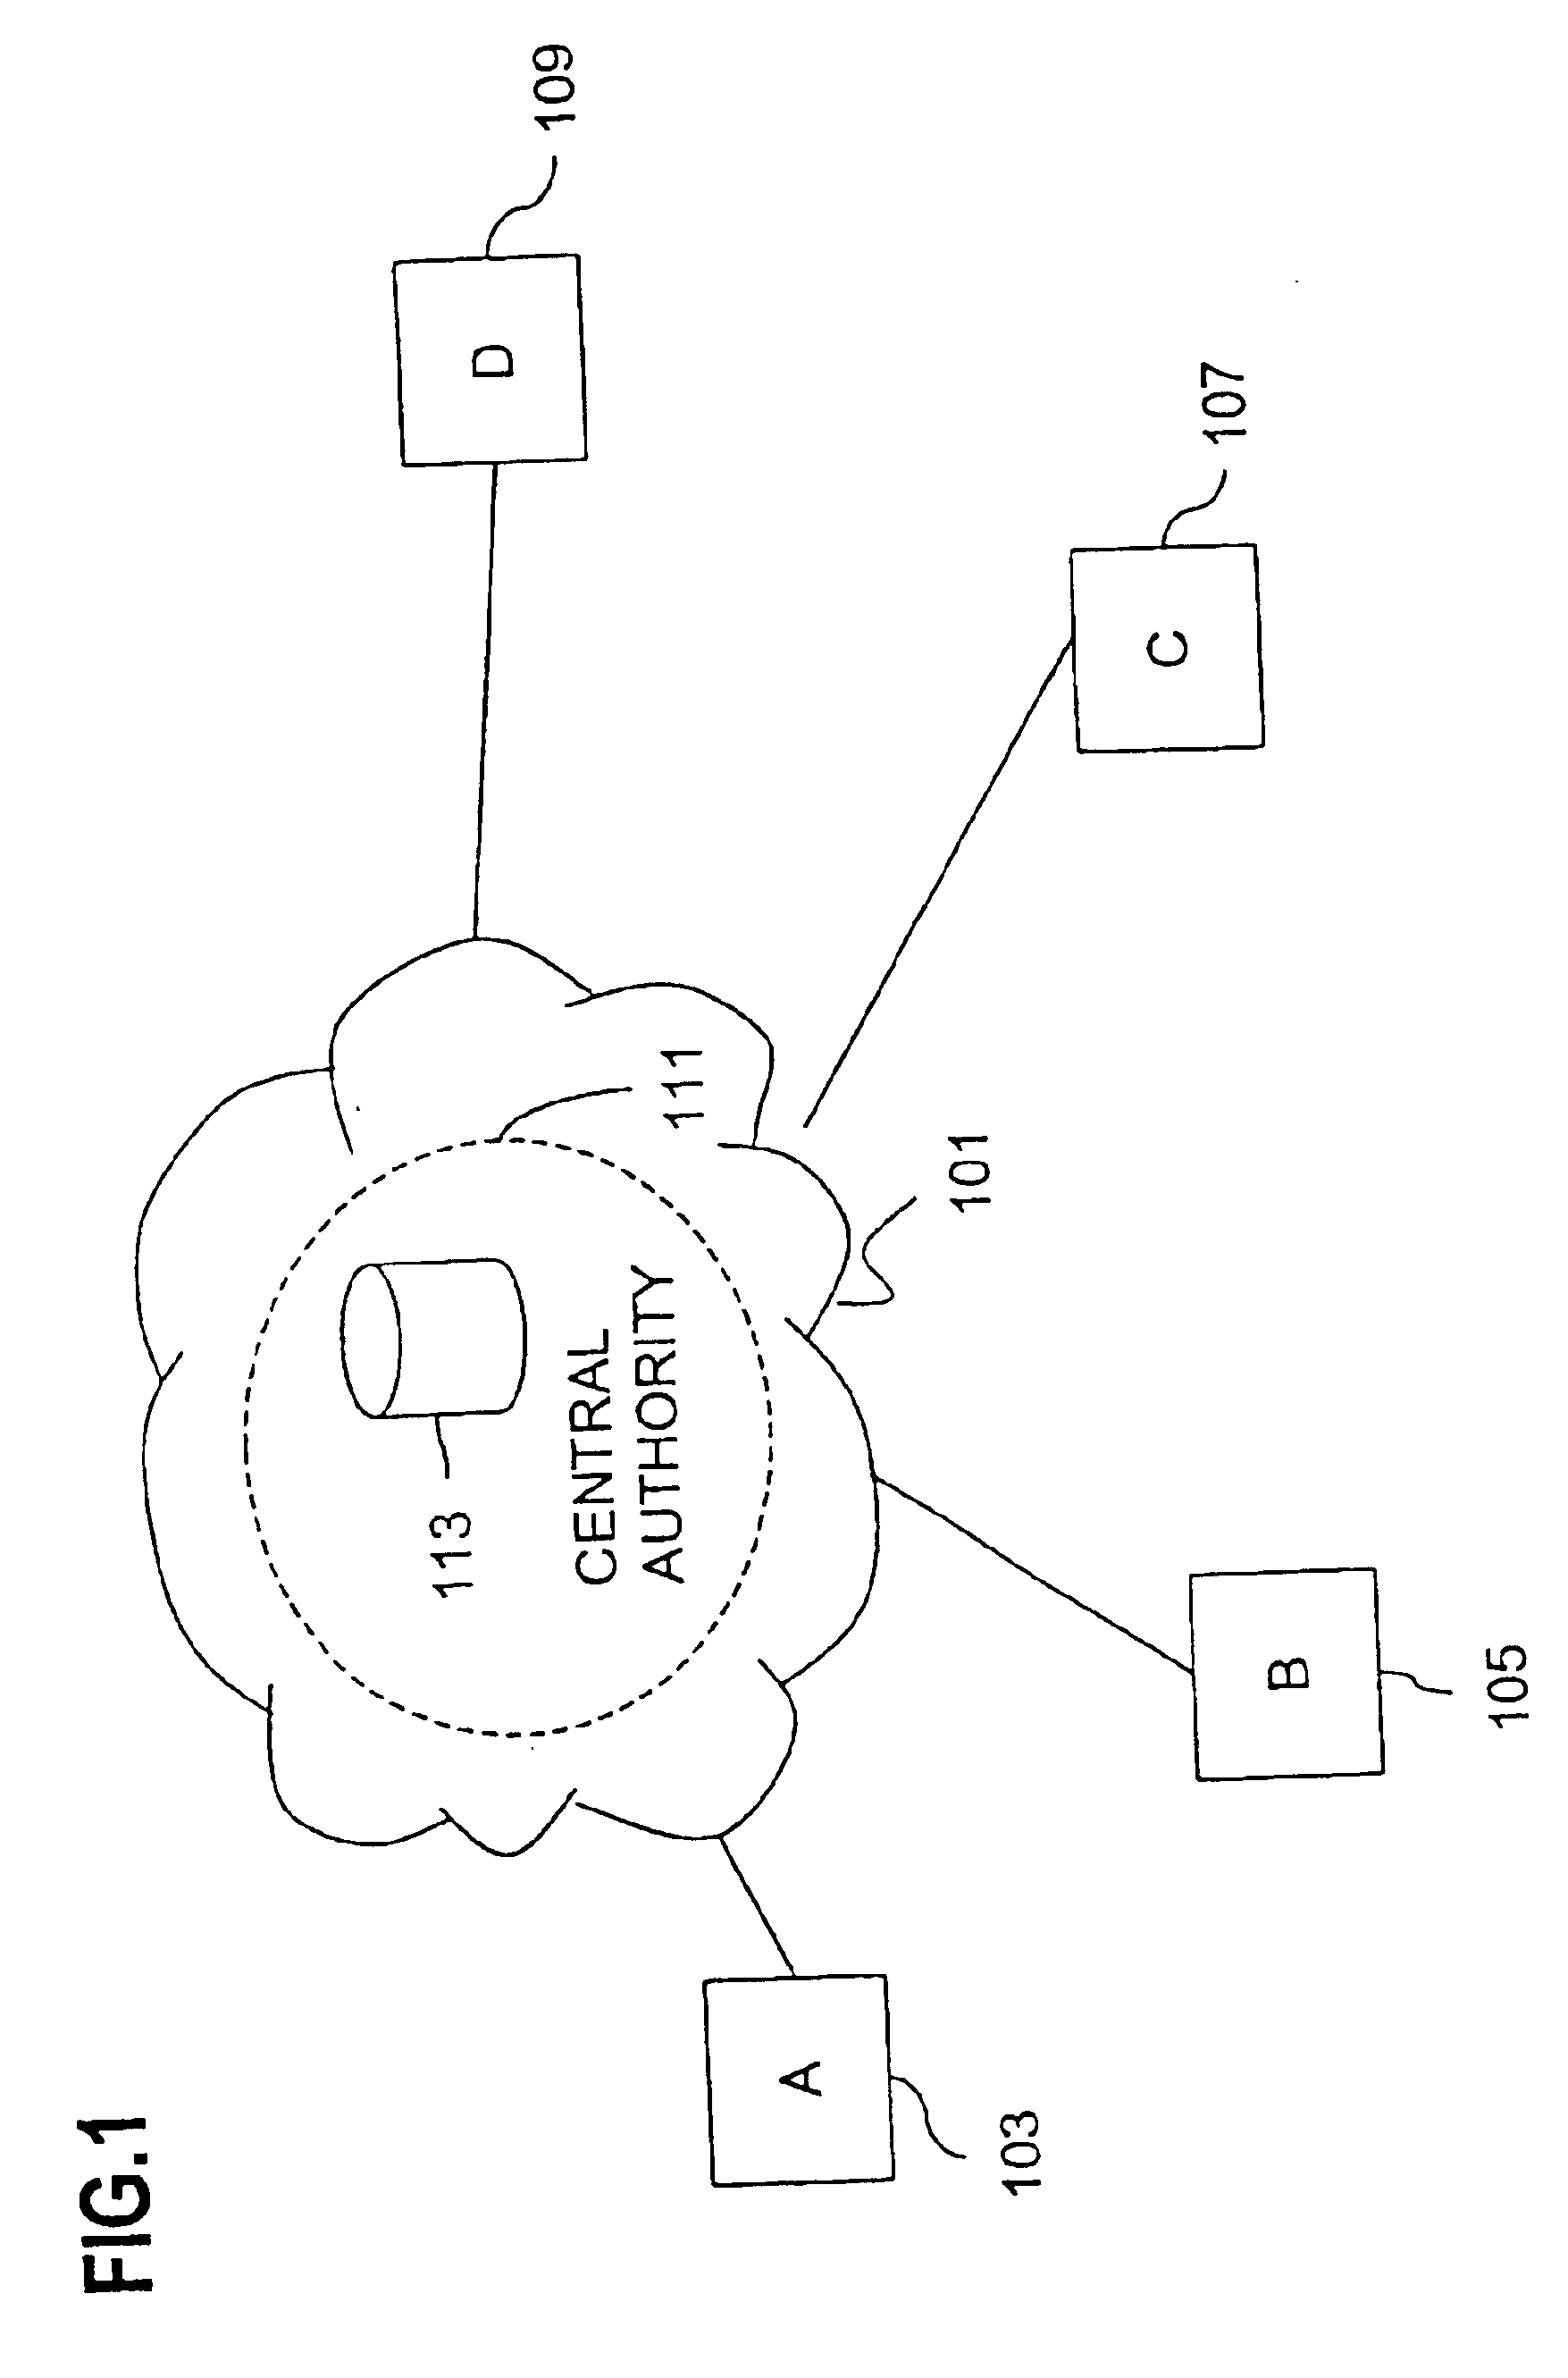 Method and apparatus for distributing and updating group controllers over a wide area network using a tree structure